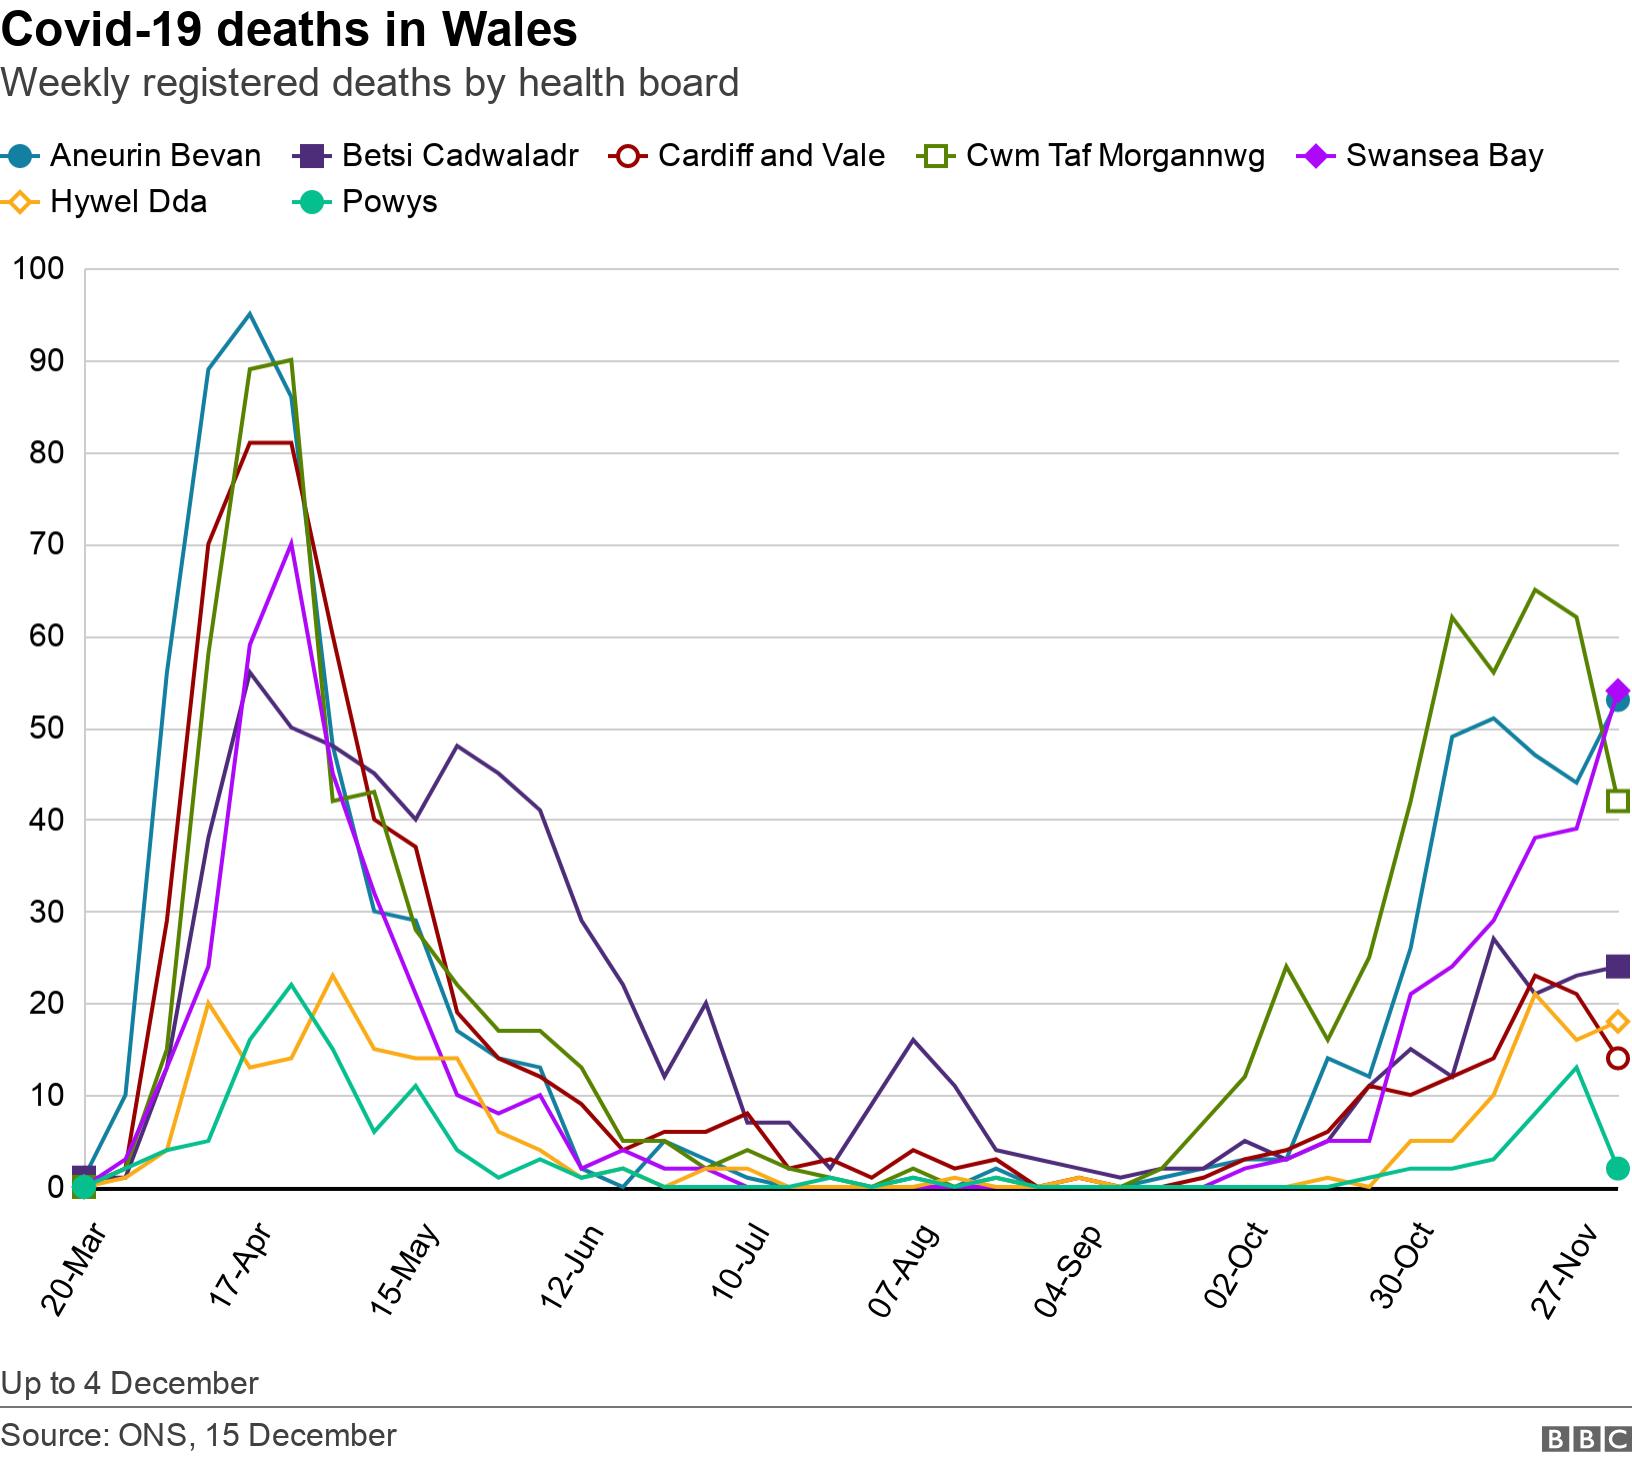 Covid-19 deaths in Wales. Weekly registered deaths by health board. Up to 4 December.